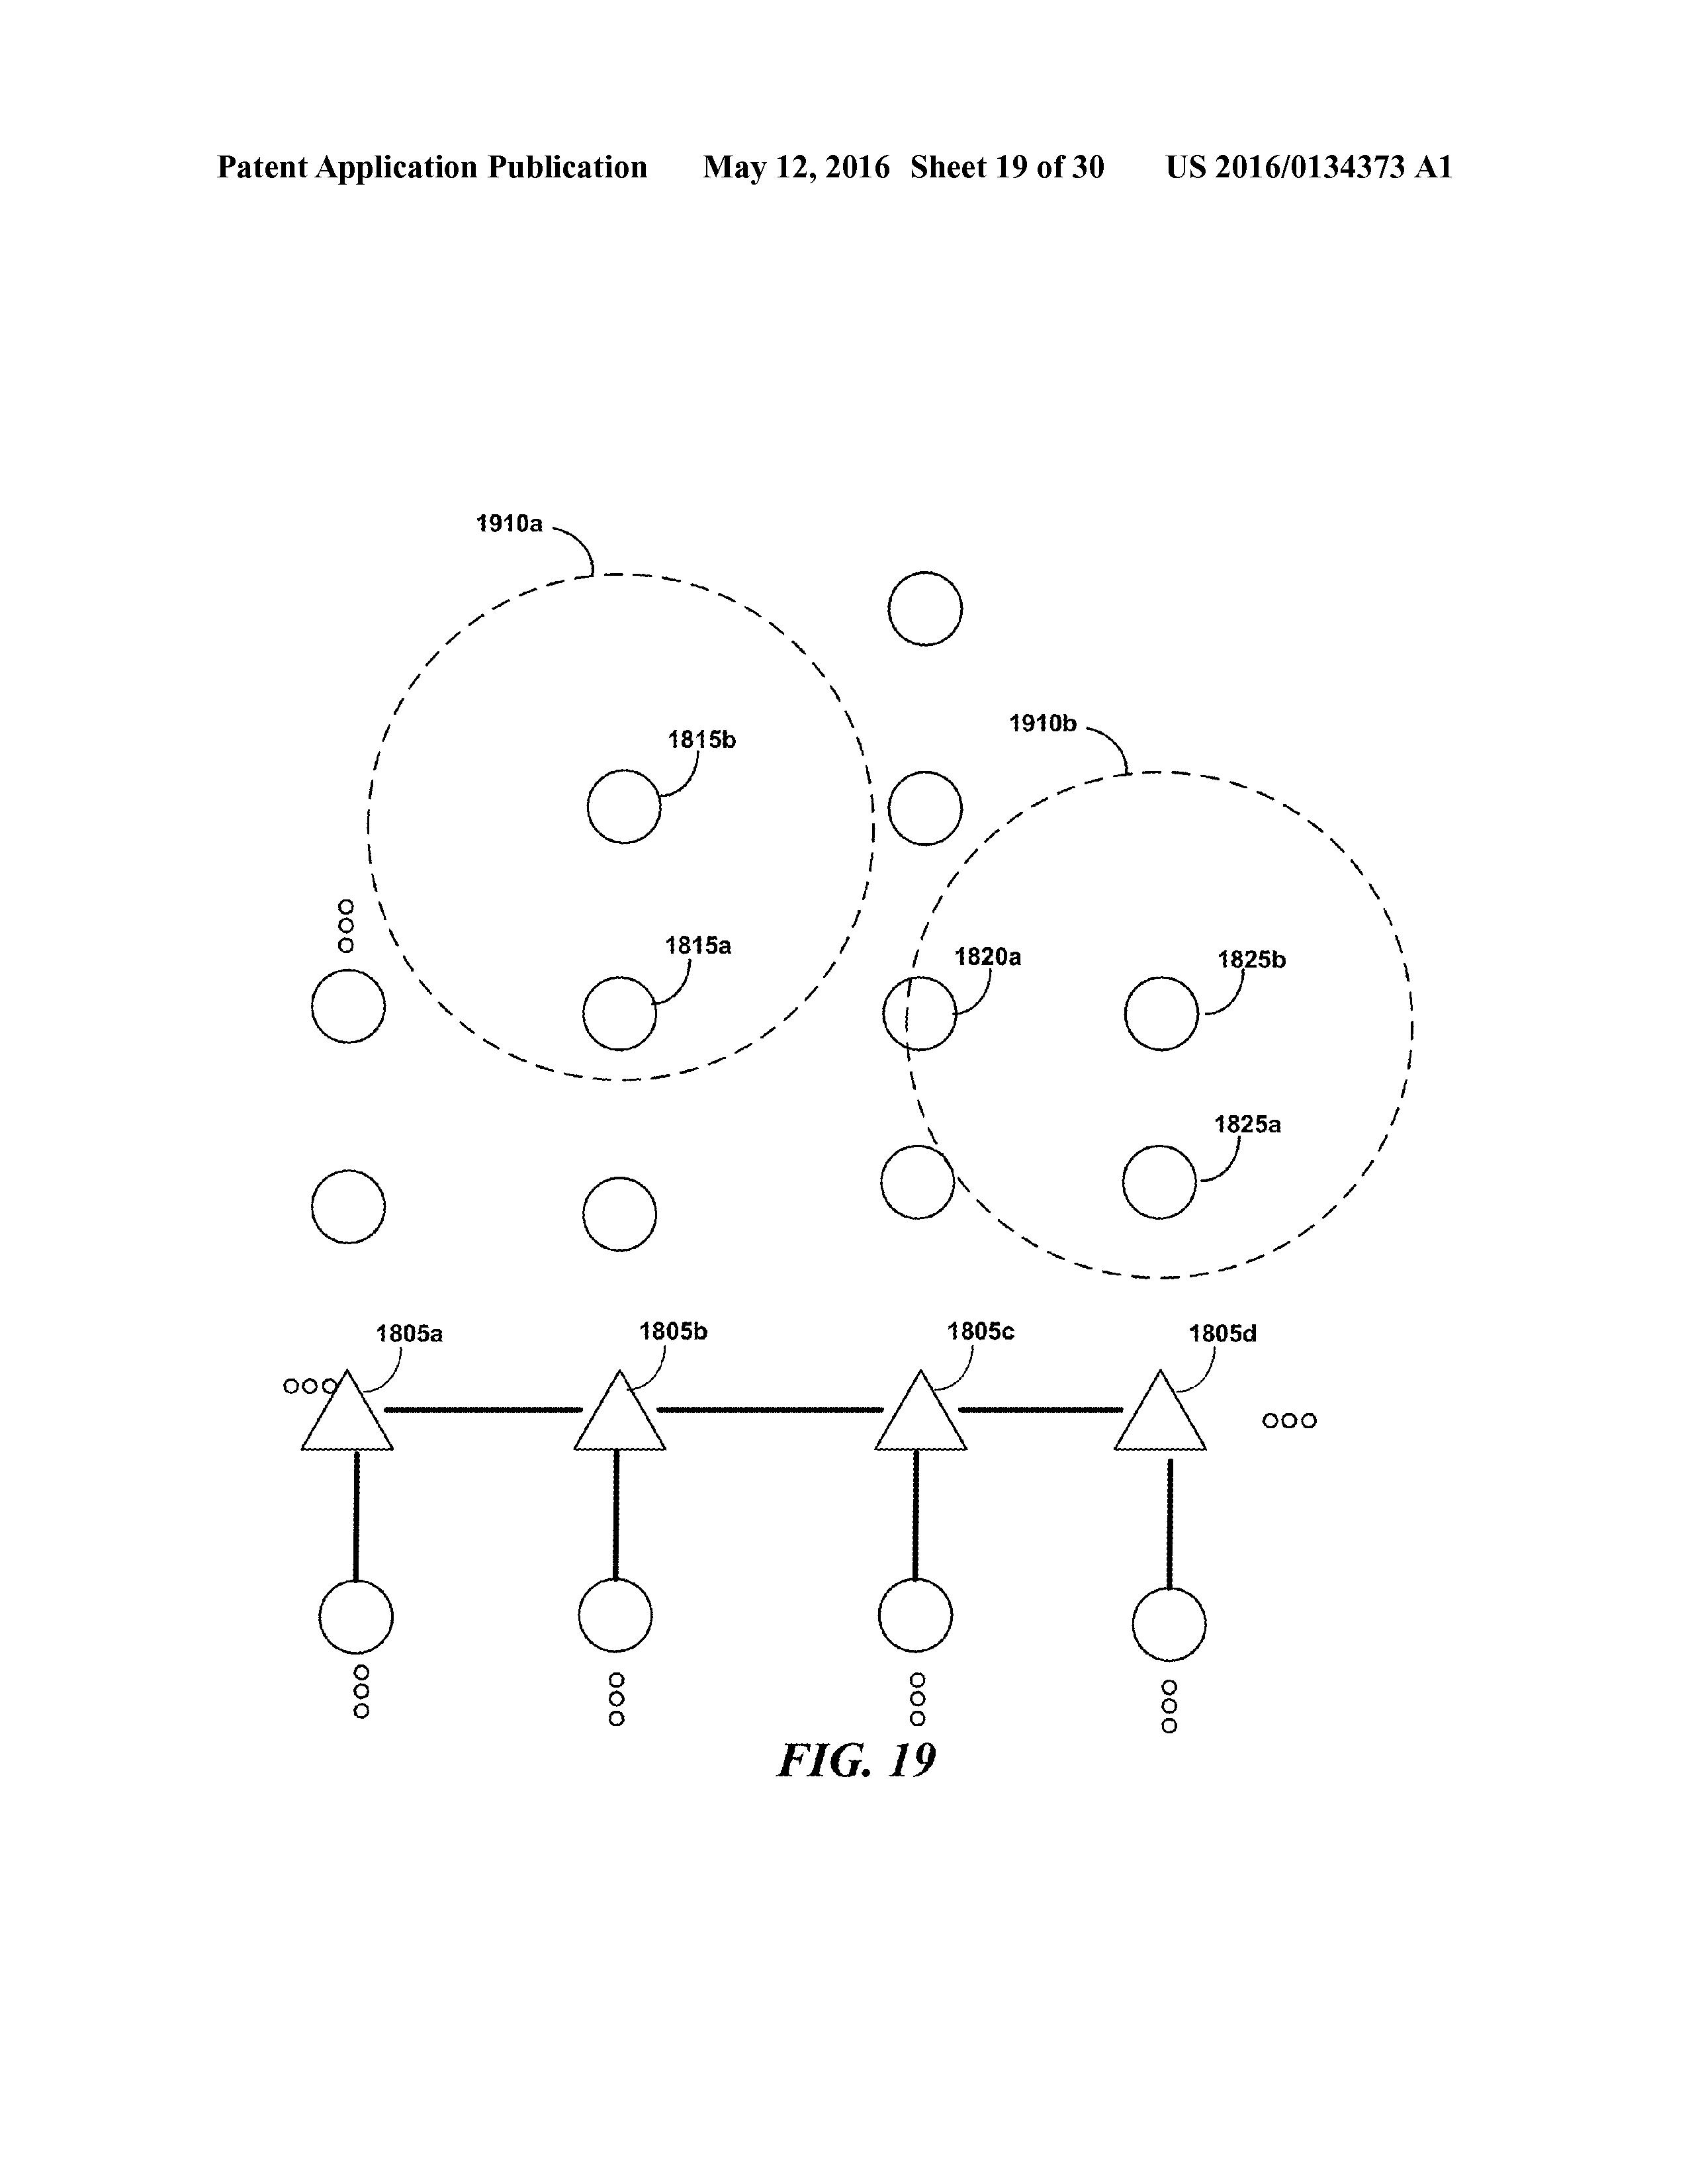 US20160134373A1 DEPLOYING LINE-OF-SIGHT COMMUNICATIONS NETWORKS